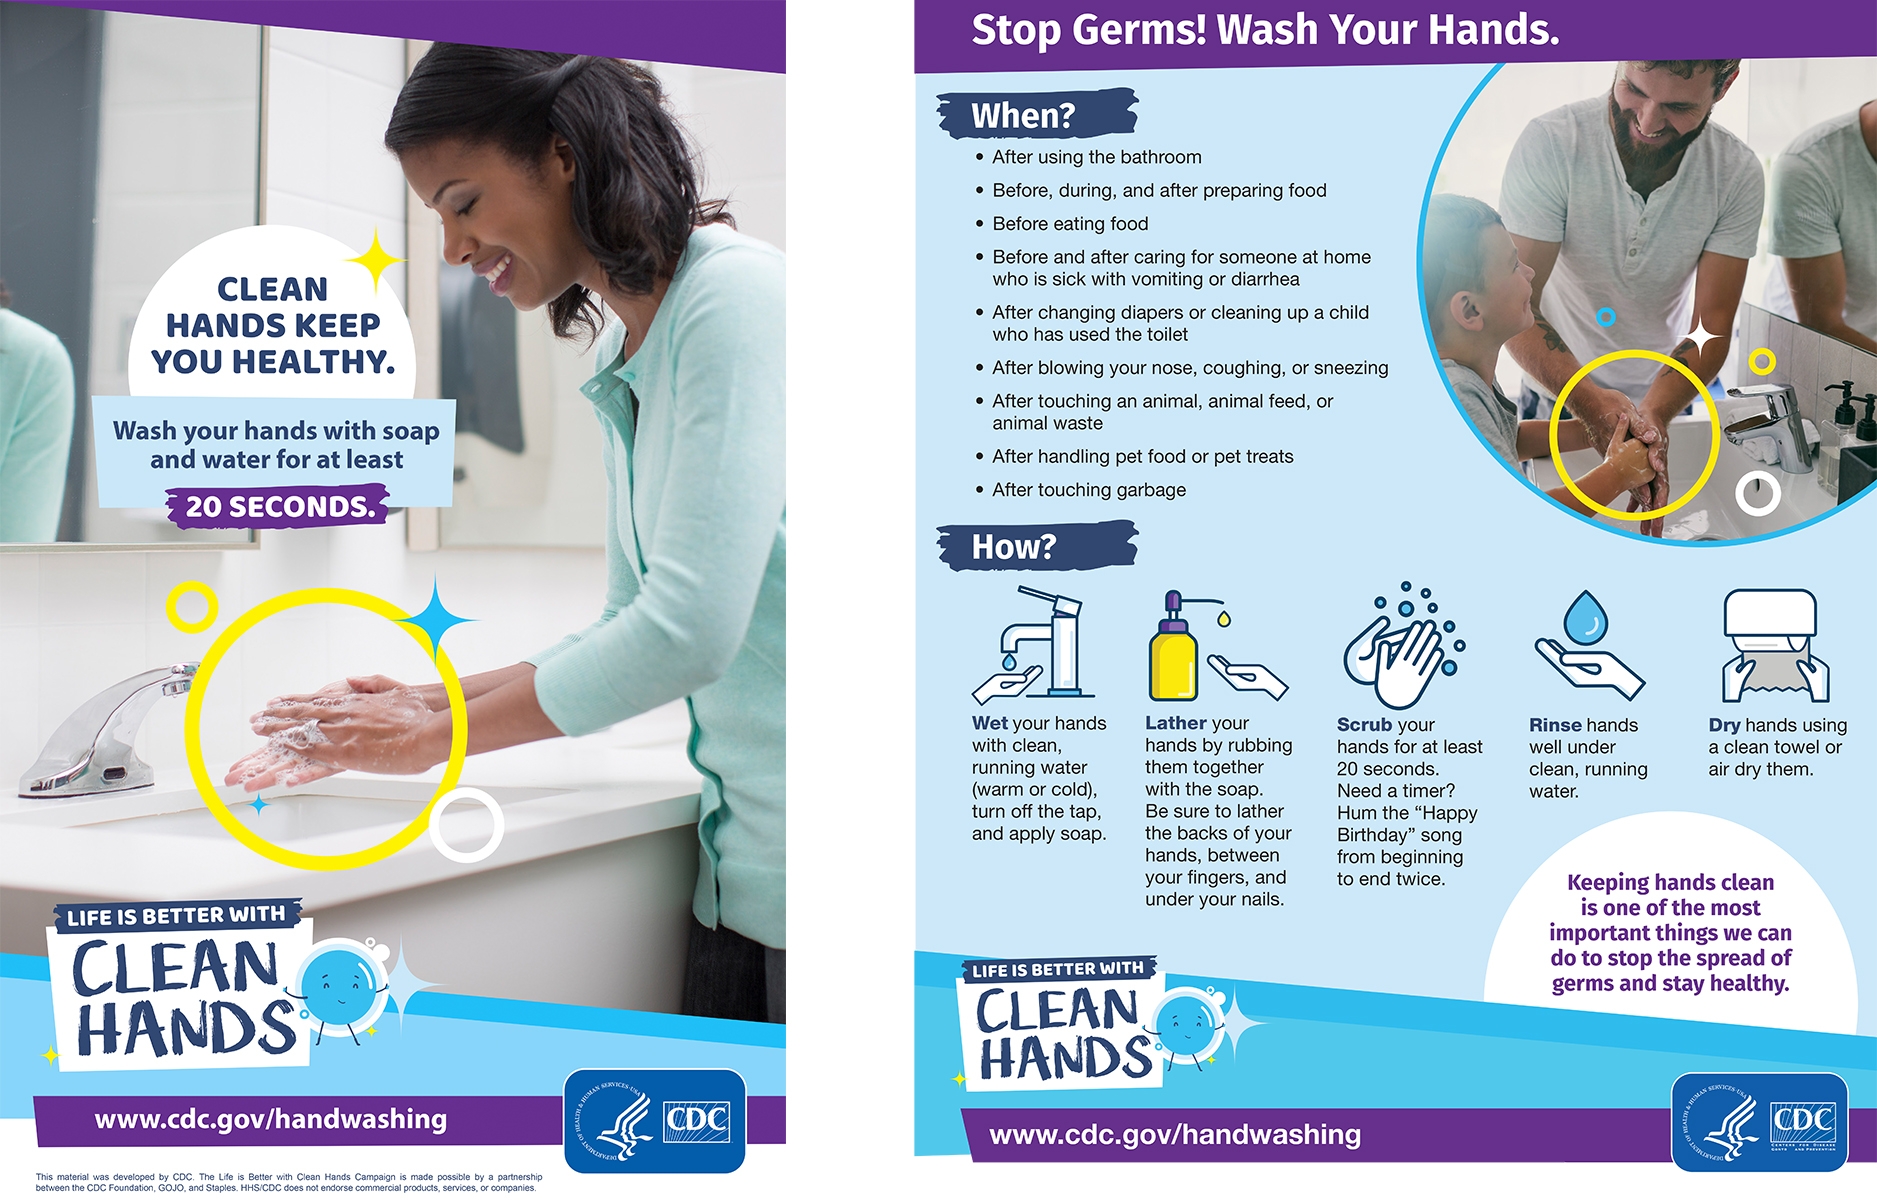 Follow Five Steps to Wash Your Hands the Right Way Washing your hands is easy, and it’s one of the most effective ways to prevent the spread of germs. Clean hands can stop germs from spreading from one person to another and throughout an entire community—from your home and workplace to childcare facilities and hospitals.  Follow these five steps every time.  Wet your hands with clean, running water (warm or cold), turn off the tap, and apply soap. Lather your hands by rubbing them together with the soap. Lather the backs of your hands, between your fingers, and under your nails. Scrub your hands for at least 20 seconds. Need a timer? Hum the “Happy Birthday” song from beginning to end twice. Rinse your hands well under clean, running water. Dry your hands using a clean towel or air dry them.